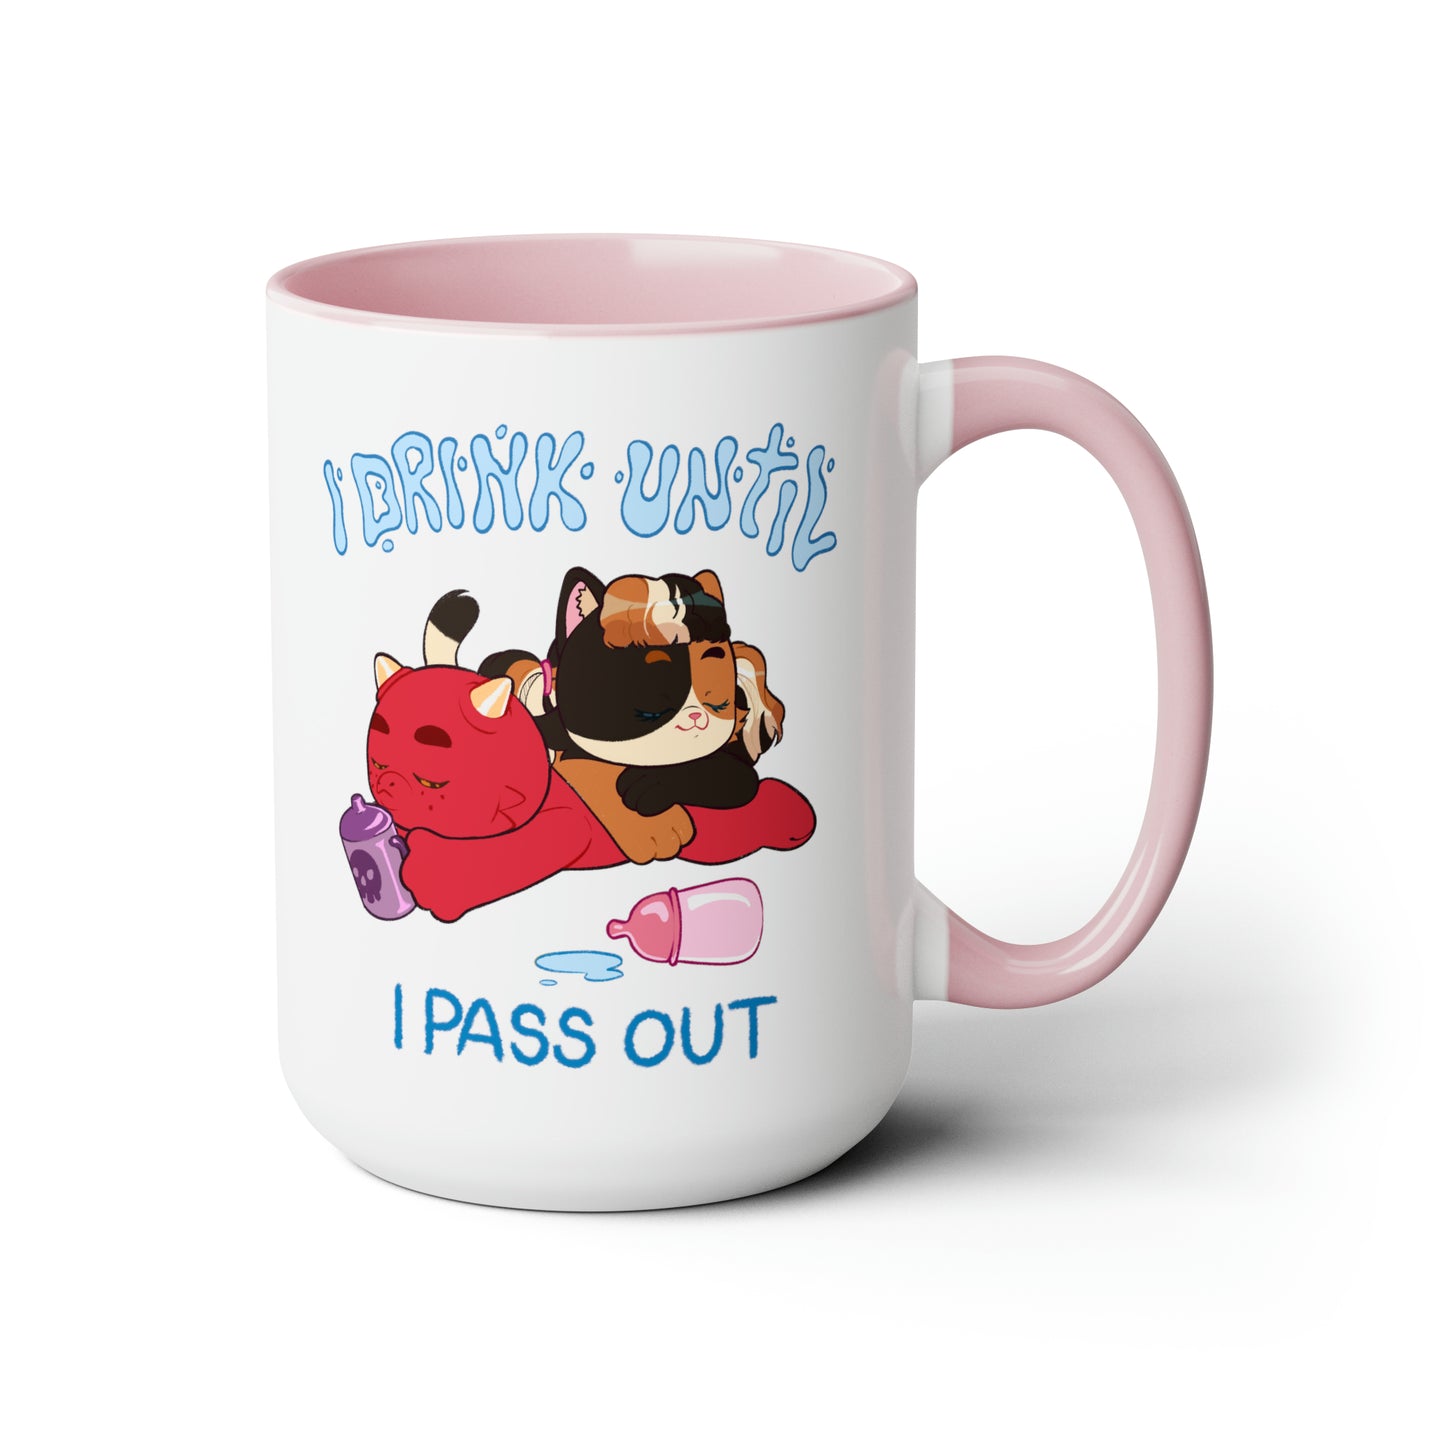 I Drink Until I Pass Out Mugs, 15oz